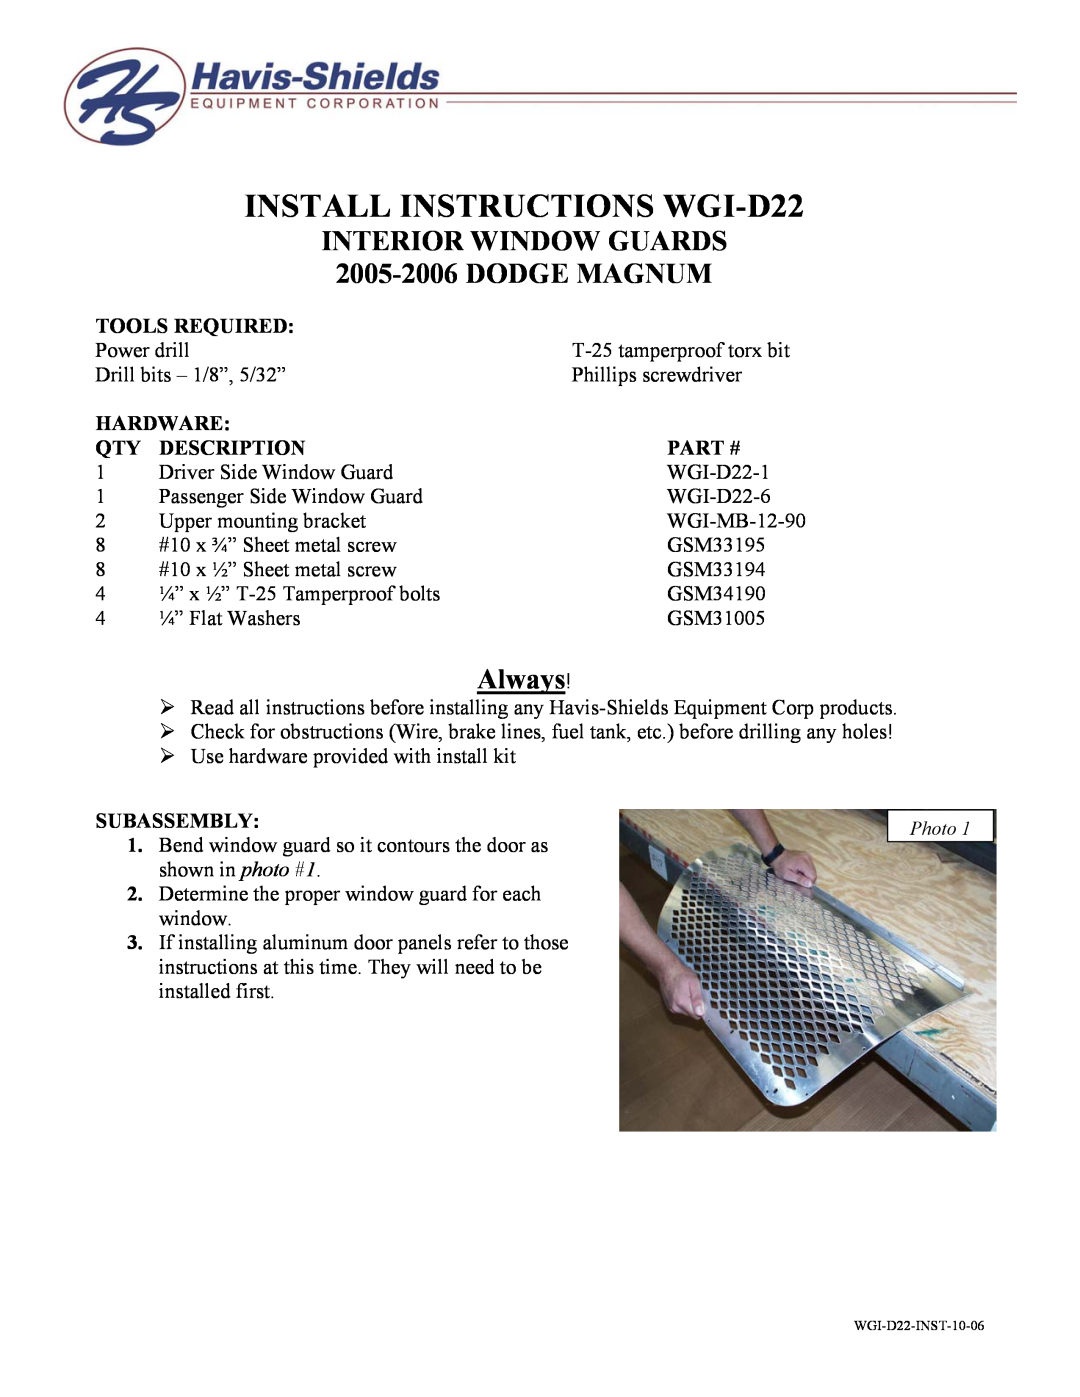 Havis-Shields manual Tools Required, Hardware, Description, Part #, Subassembly, INSTALL INSTRUCTIONS WGI-D22, Always 